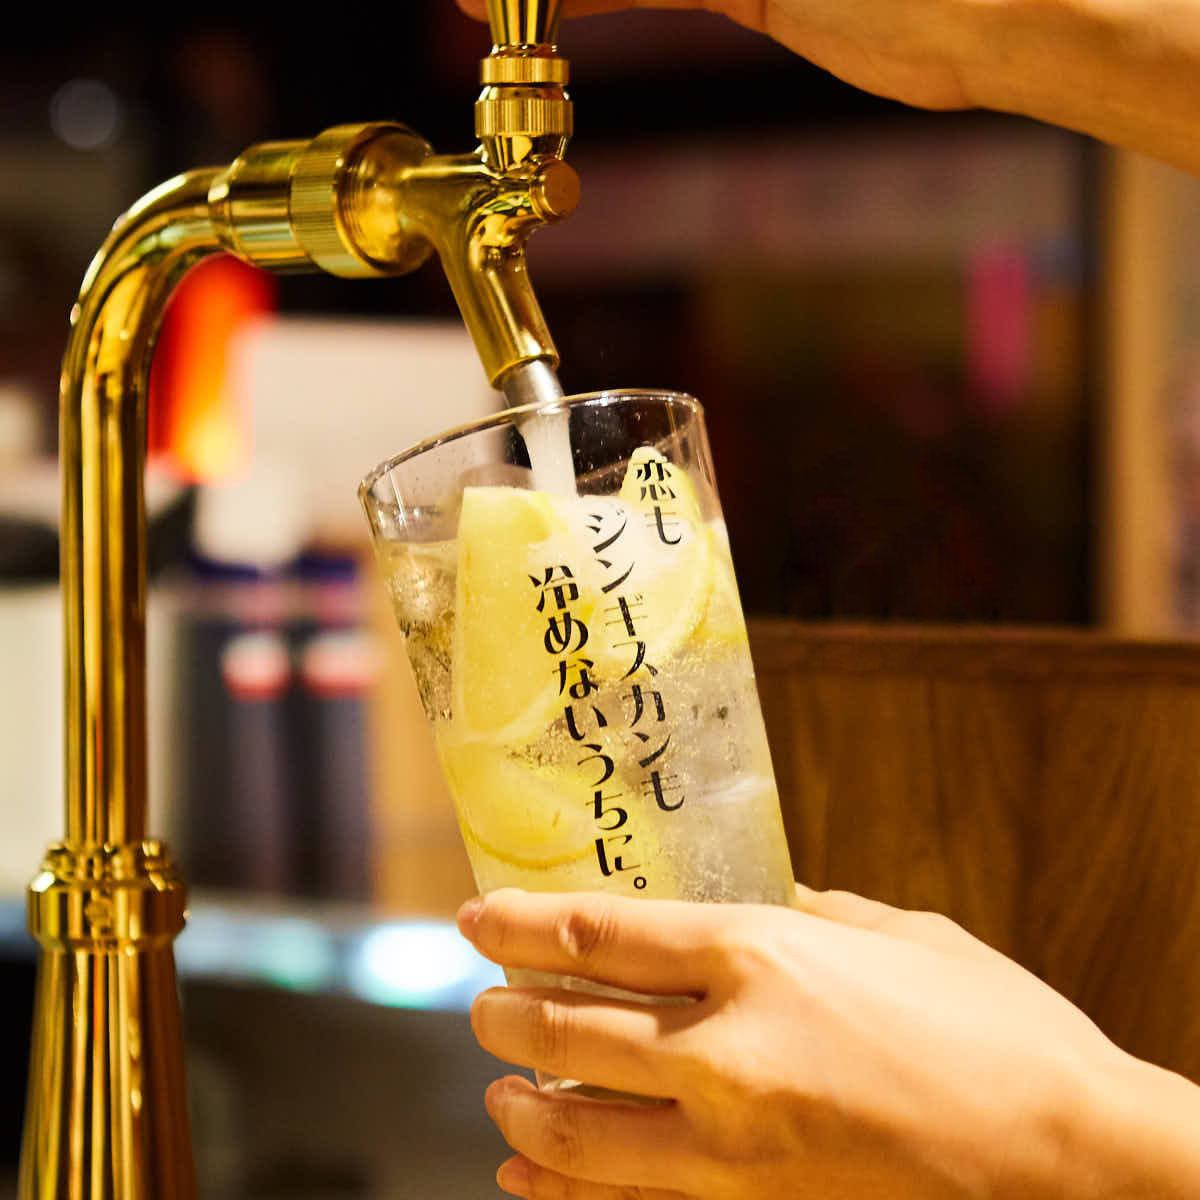 All-you-can-drink tabletop lemon sour for 550 yen for 60 minutes